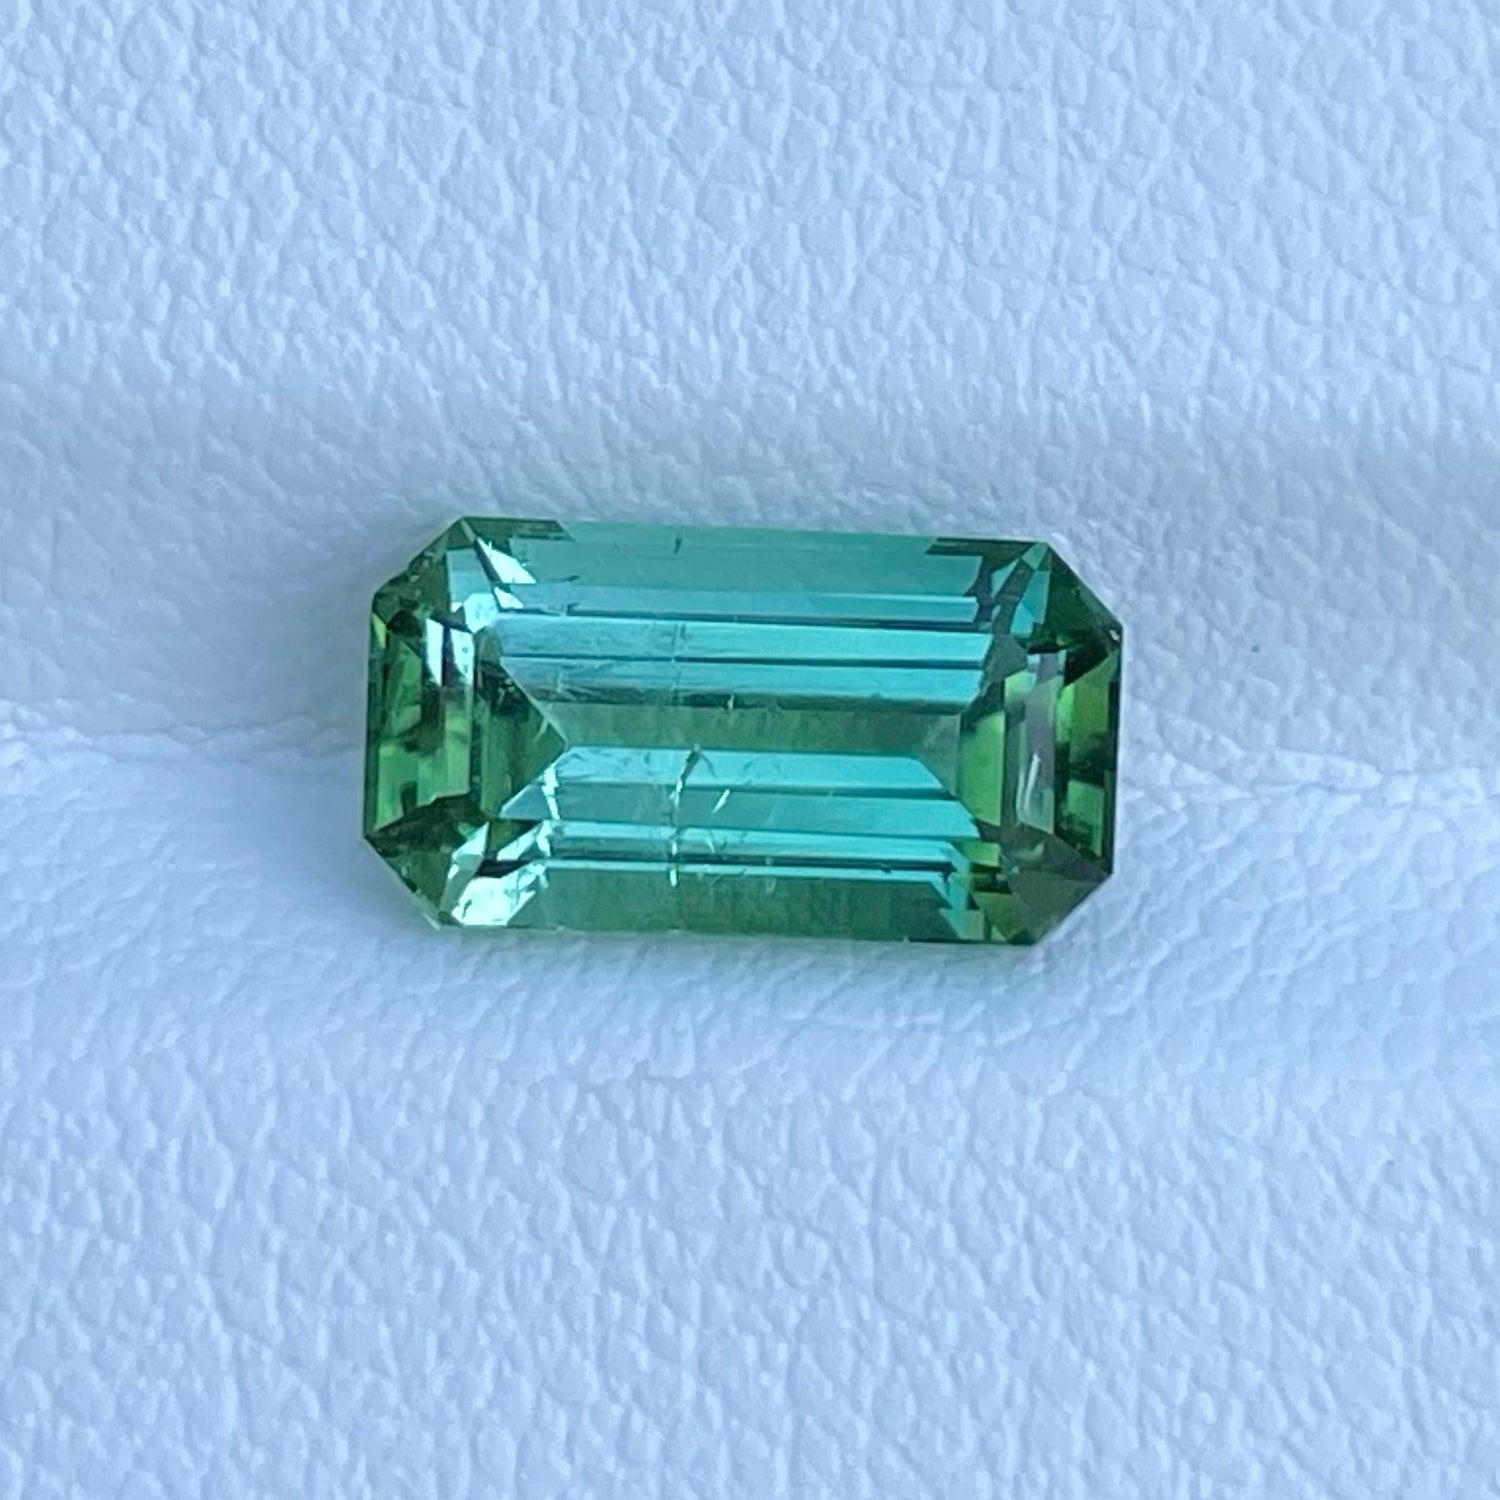 Natural Mint Green Tourmaline Ring, Available For Sale At Wholesale Price Natural High Quality 2.70 Carats SI Clean Clarity Natural Tourmaline From Afghanistan.

Product Information:

GEMSTONE TYPE: Natural Mint Green Tourmaline Ring
WEIGHT: 2.70